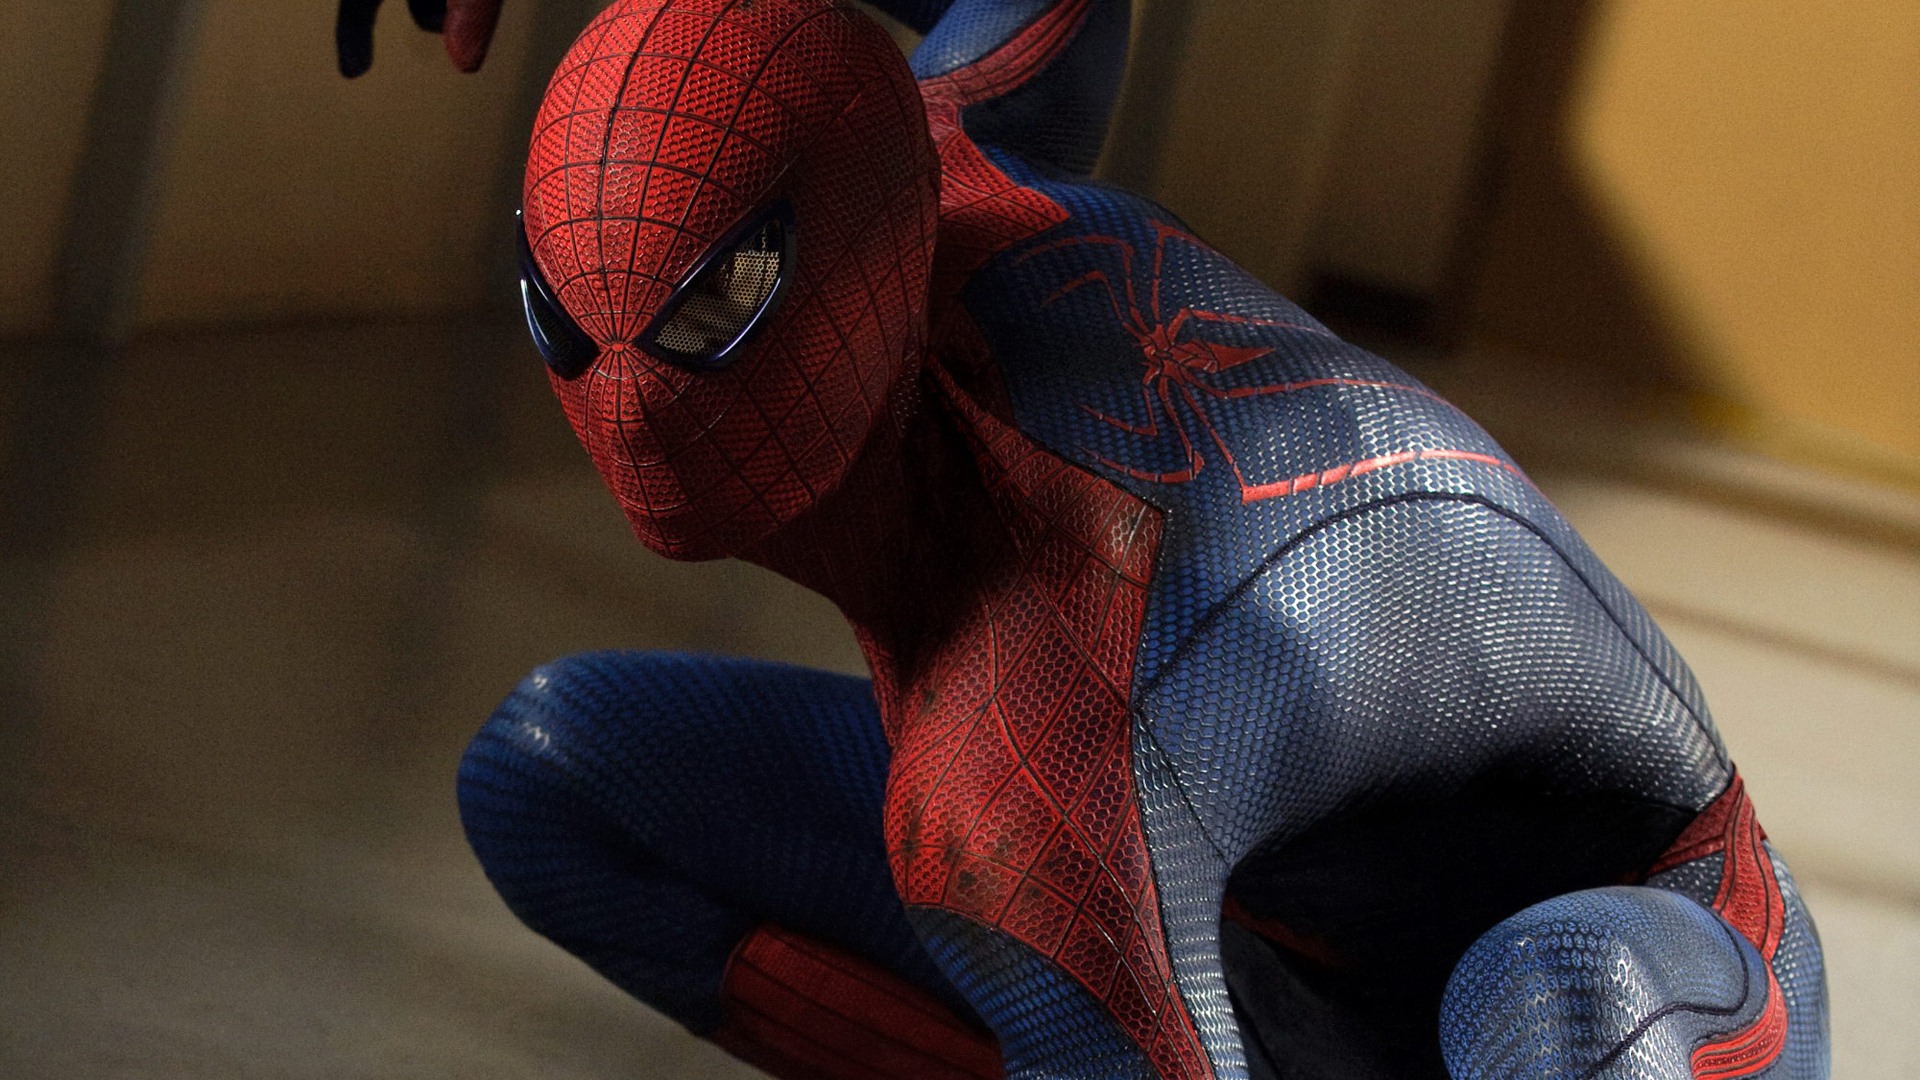 Le 2012 Amazing Spider-Man wallpapers #3 - 1920x1080